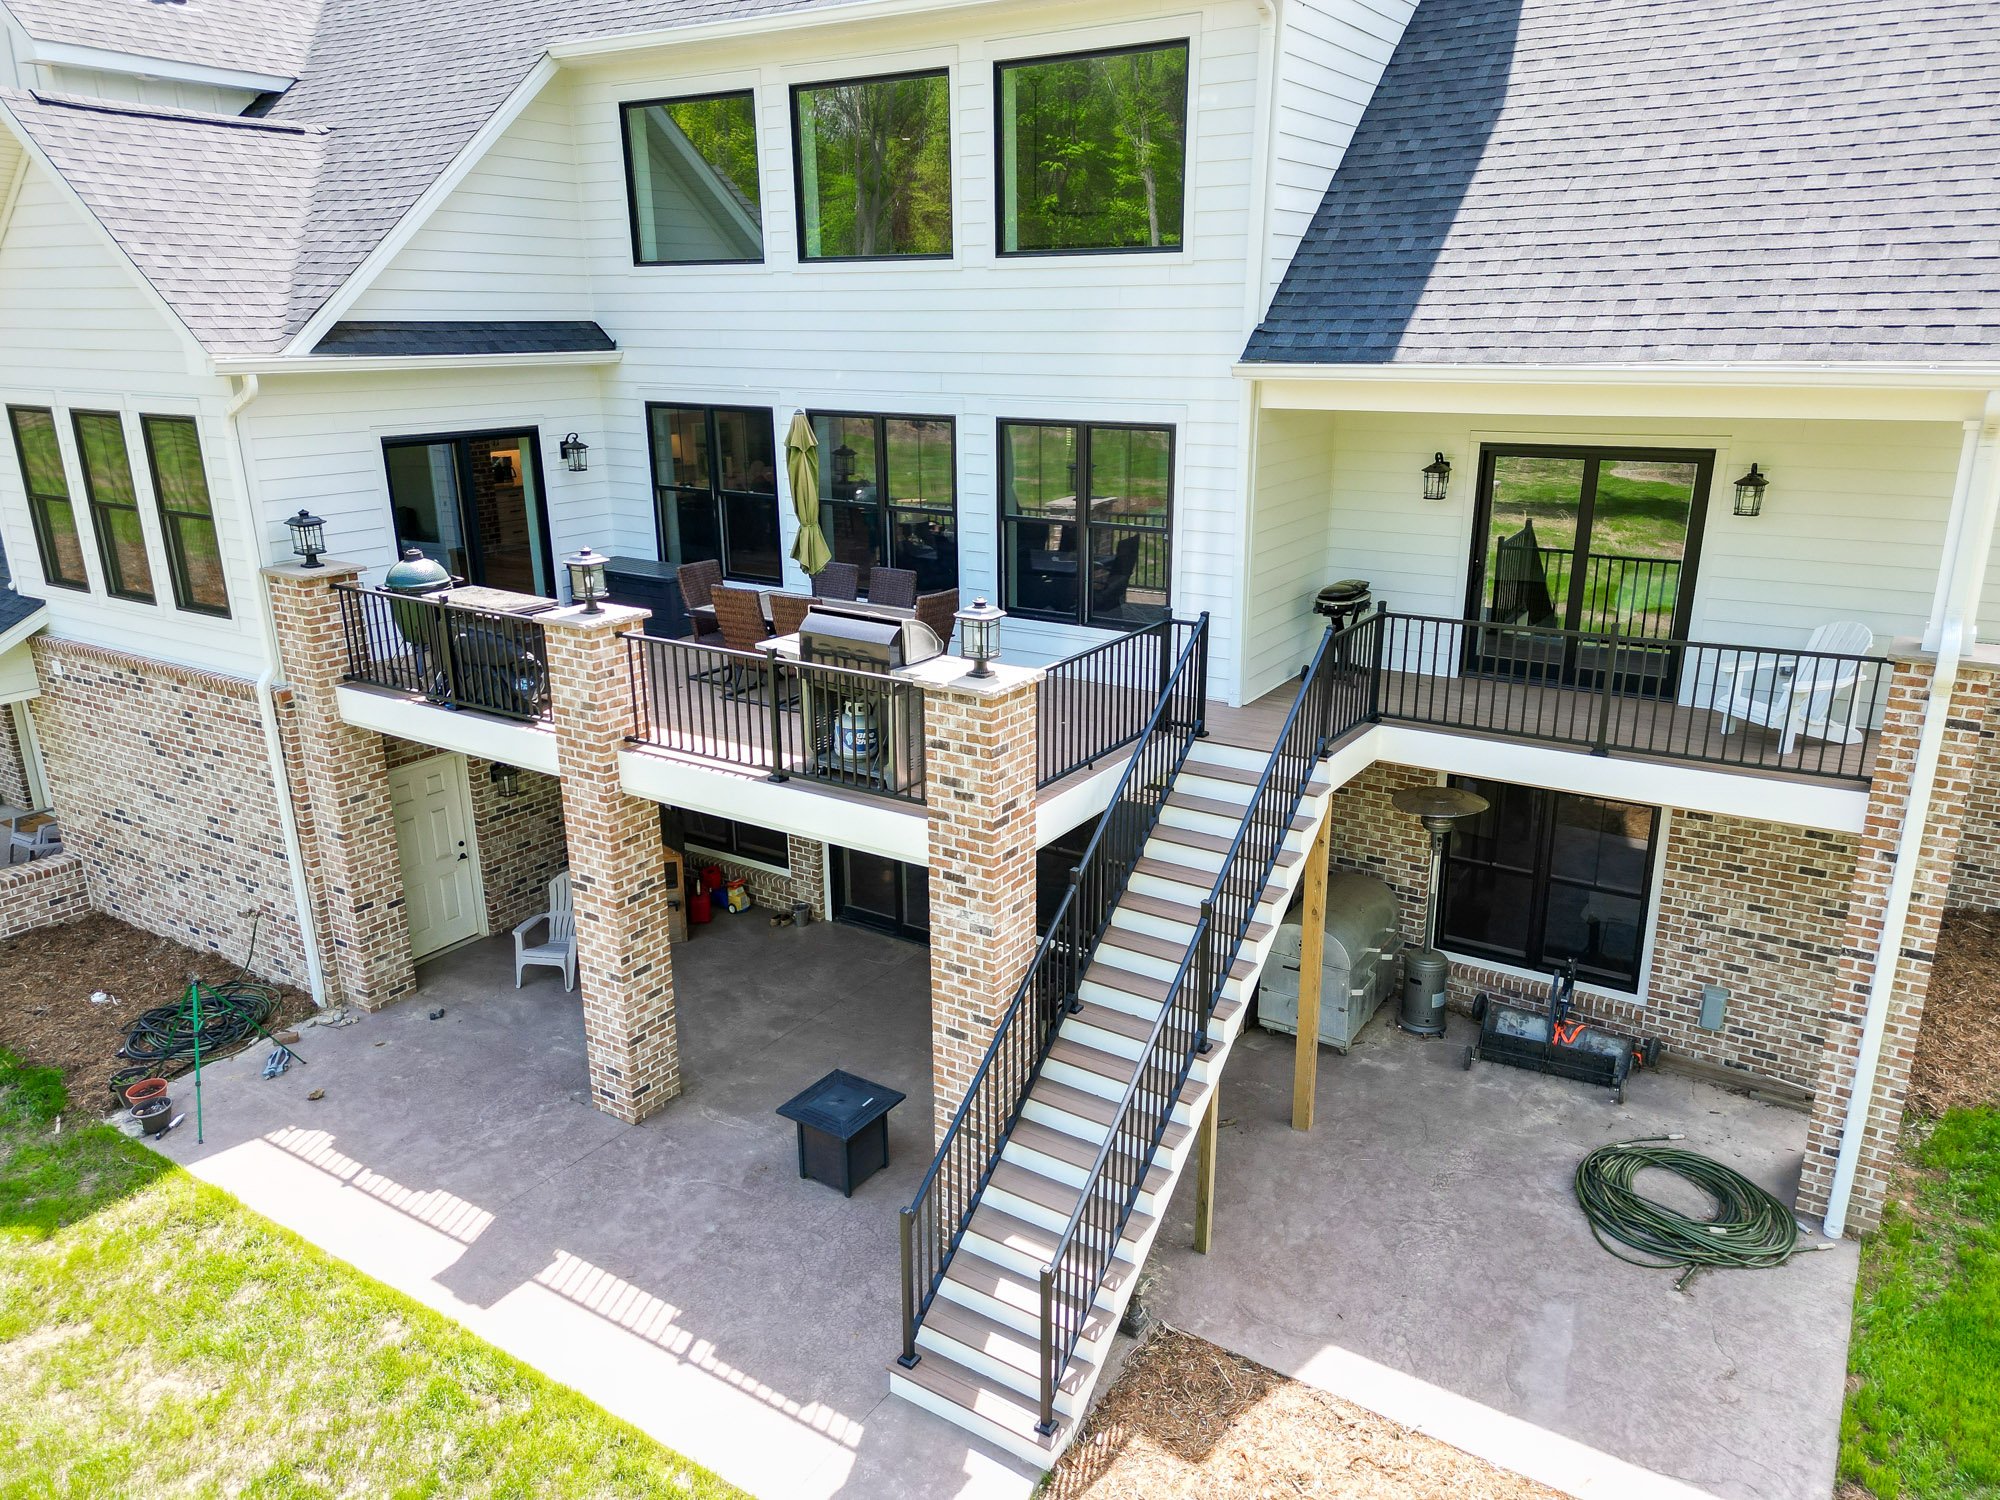 They call it a dream home for a reason, it envisions everything you could possibly want. We want to help you visualize and achieve that dream of the perfect house. 

#customhomebuilder #shenandoahvalley #homebuildingjourney #harrisonburgva #dreamhome